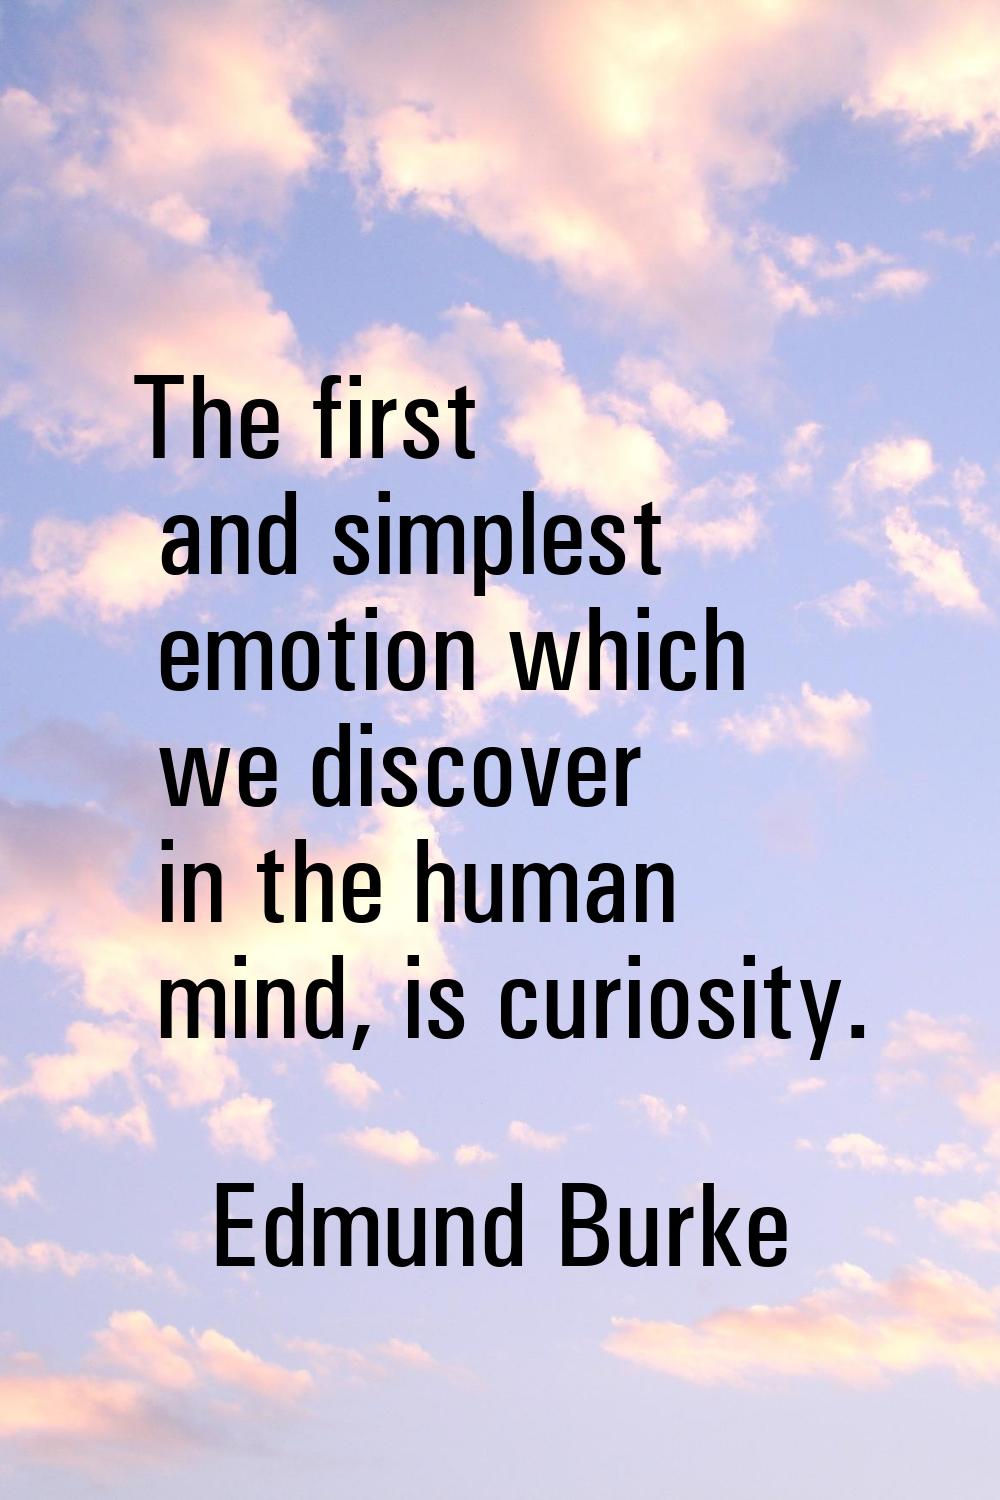 The first and simplest emotion which we discover in the human mind, is curiosity.